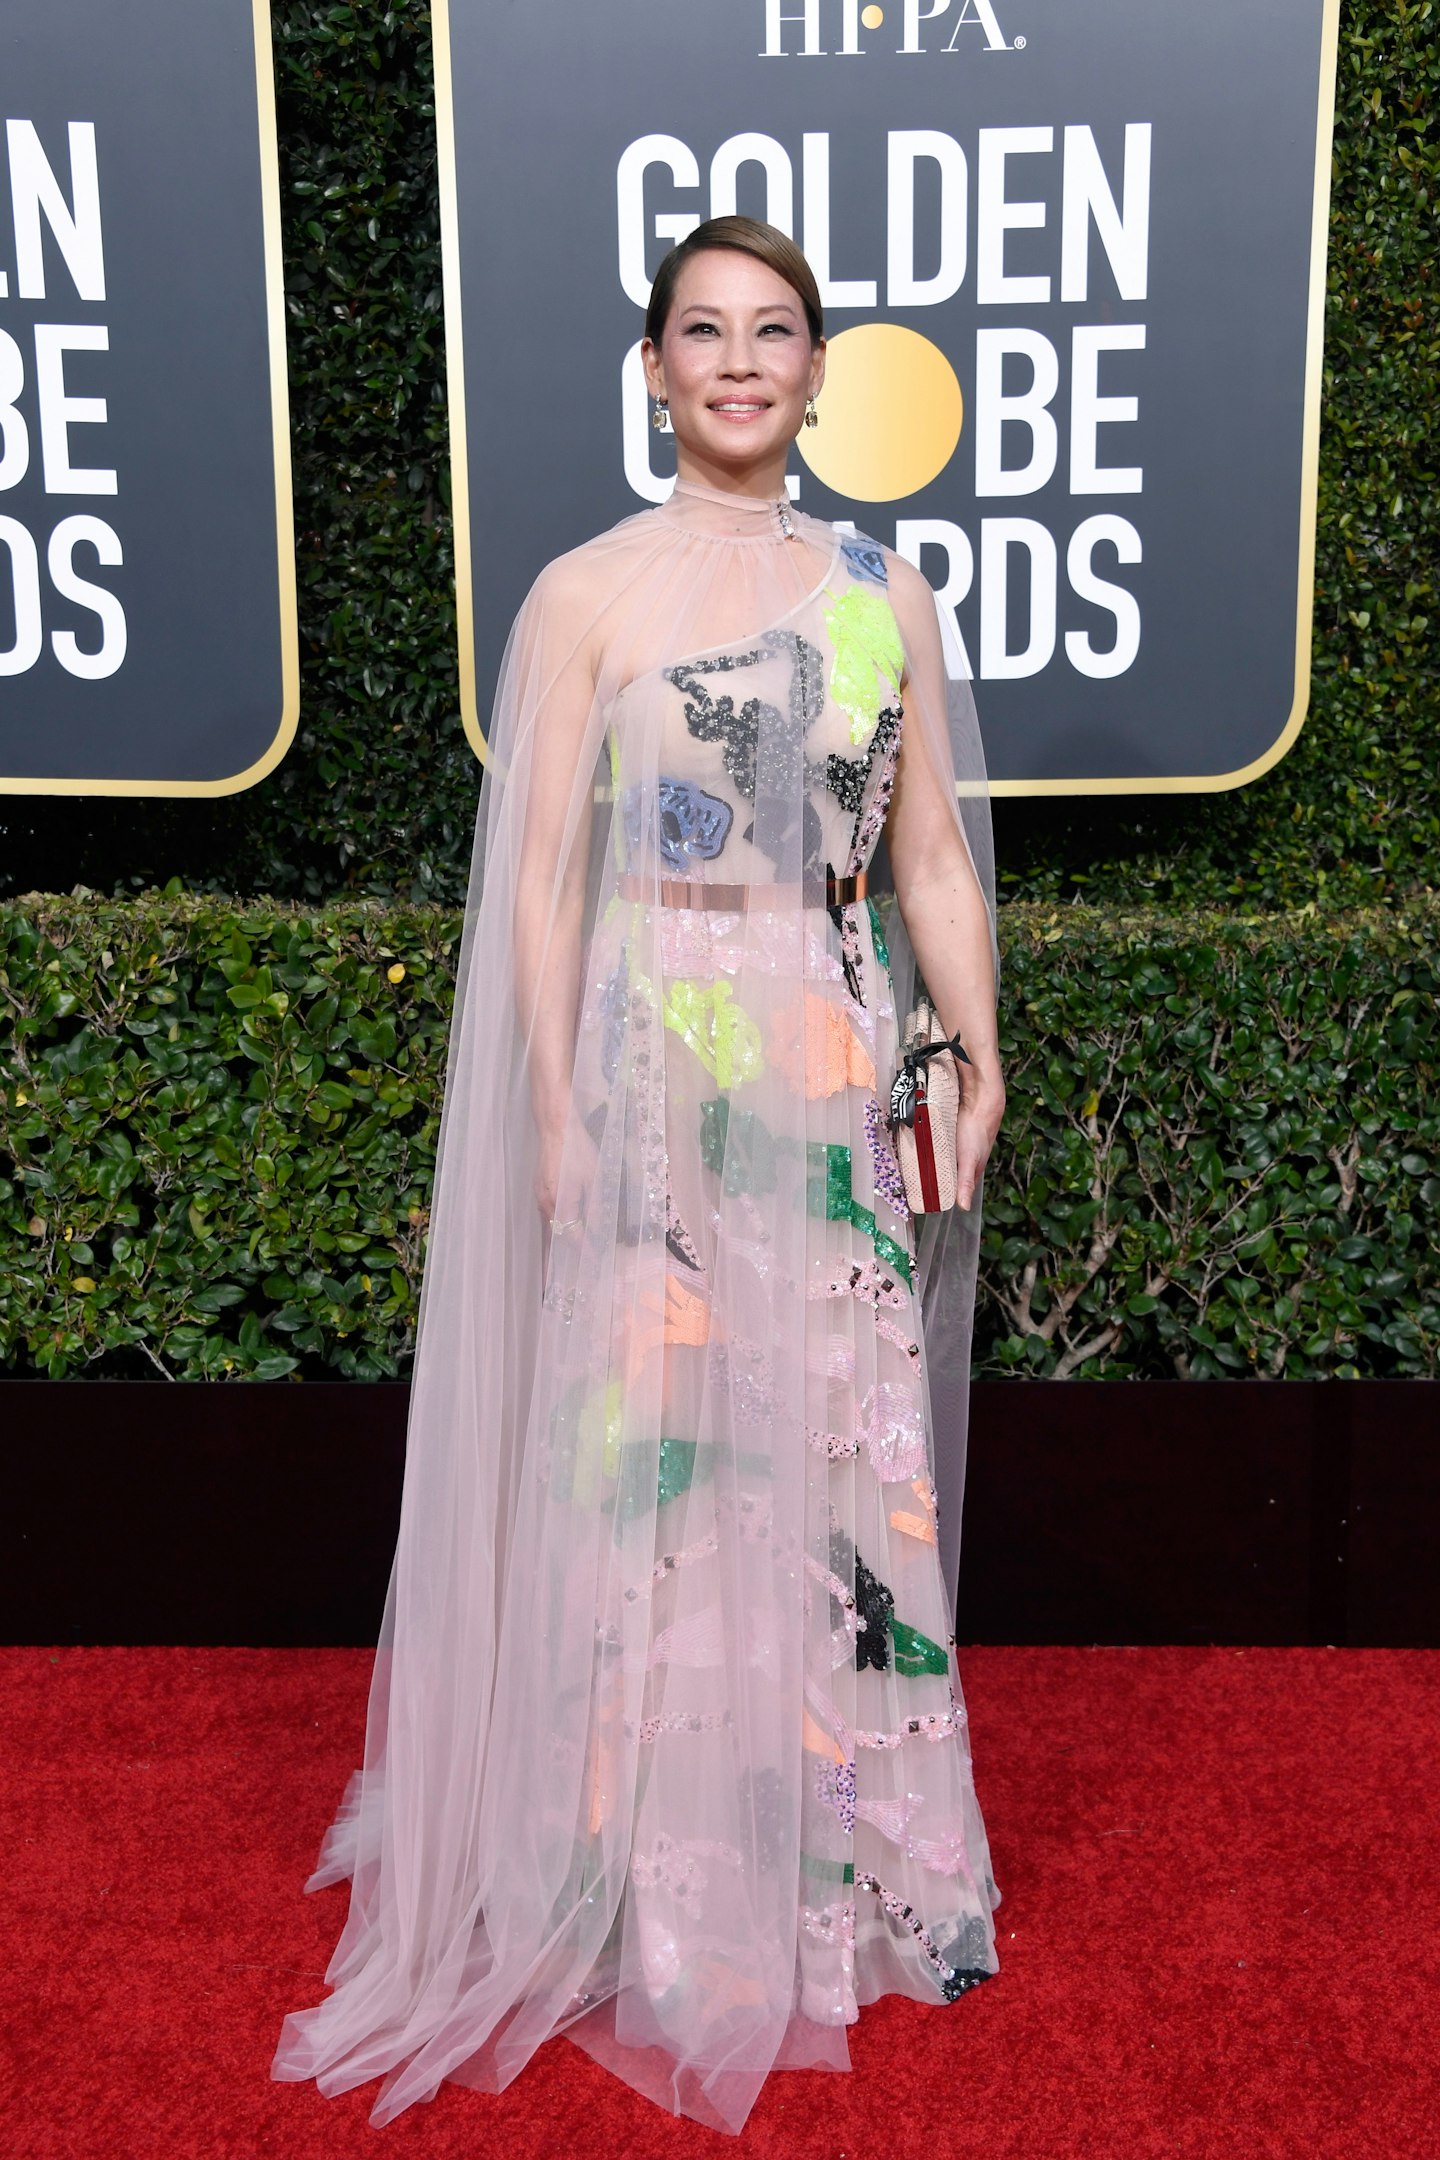 Lucy Liu at the 2019 Golden Globes